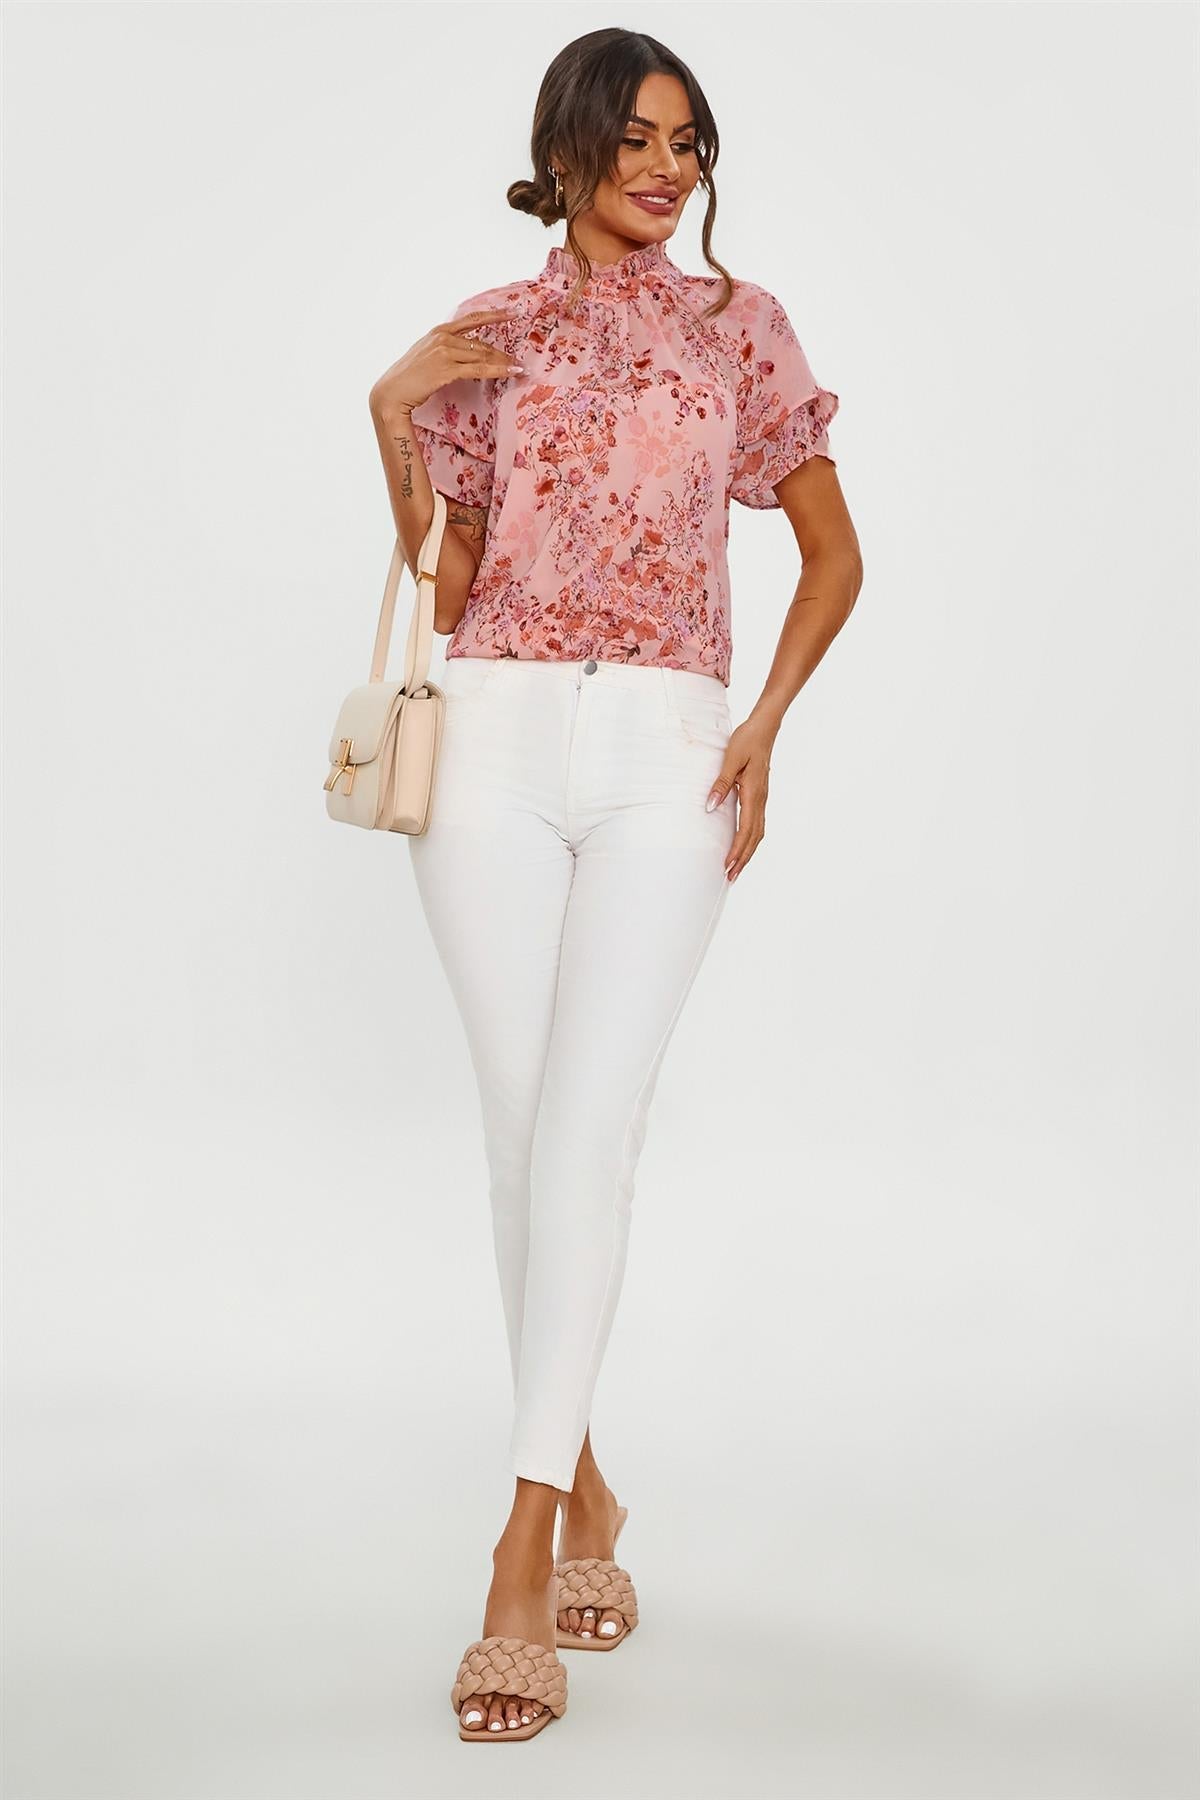 Floral Print Frill Hem Sleeve High Neck Blouse Top In Pink FS657-PinkF